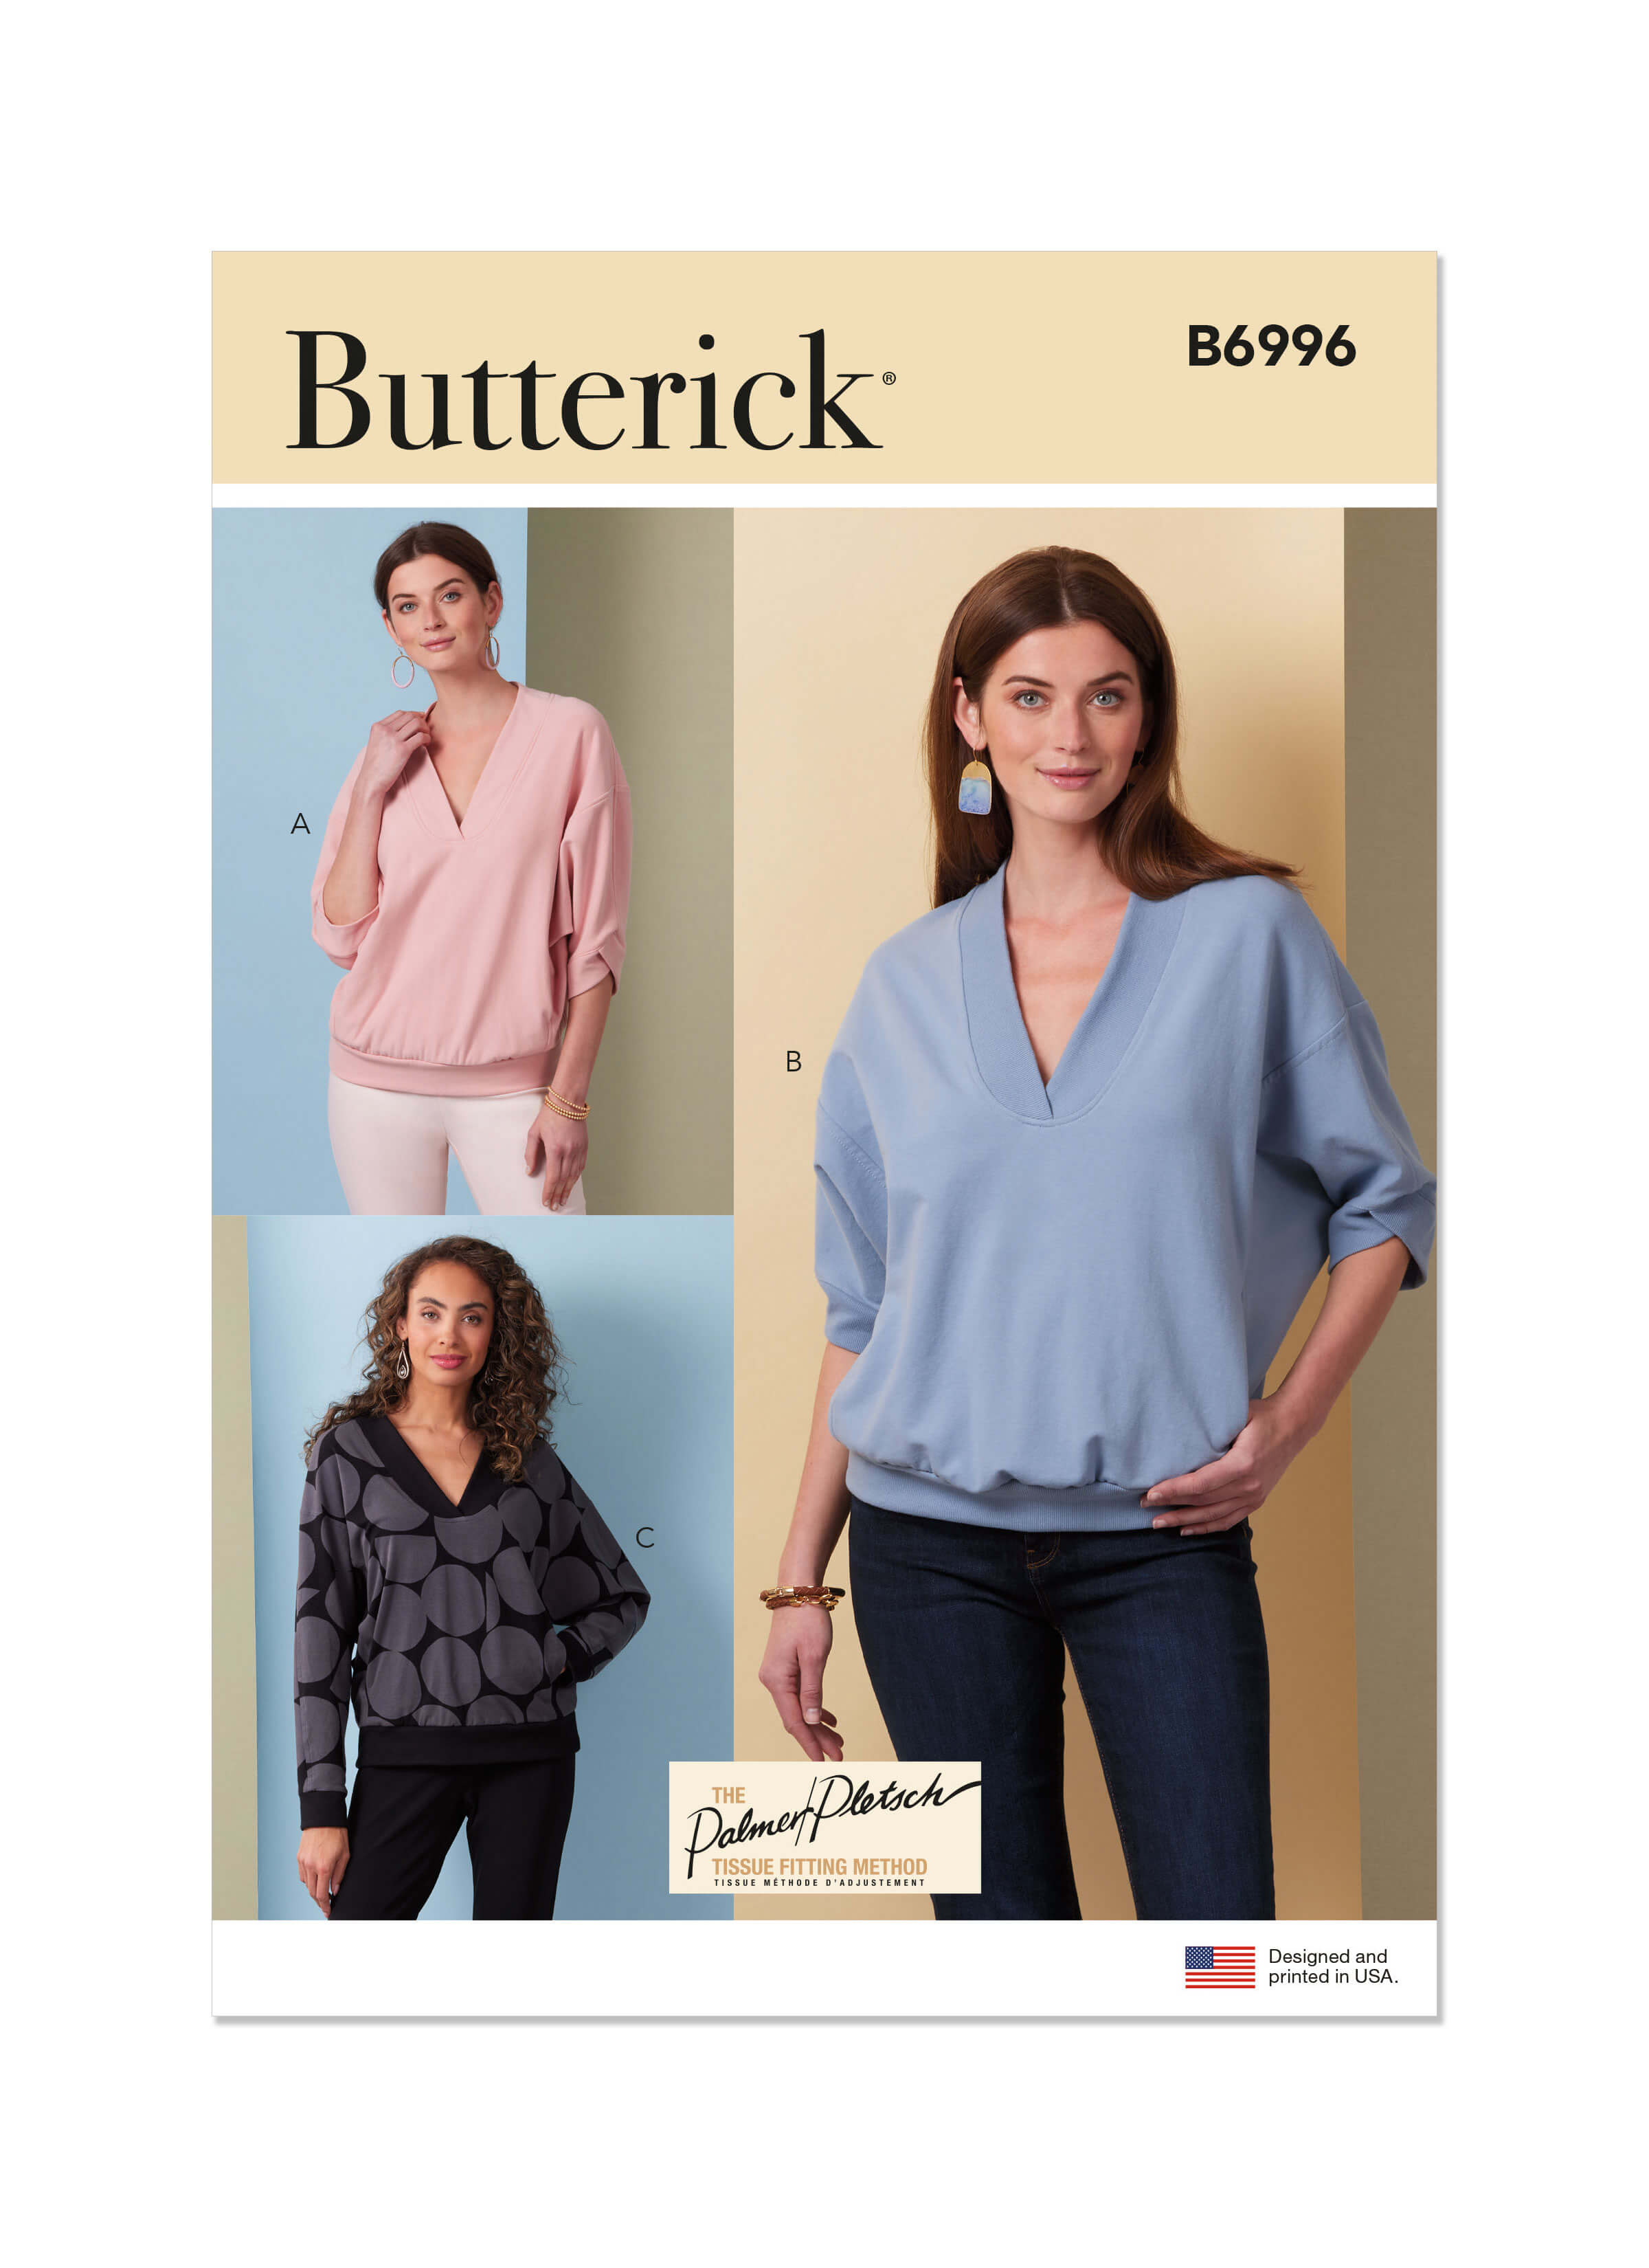 Butterick Sewing Pattern B6996 Misses' Knit Tops by Palmer/Pletsch